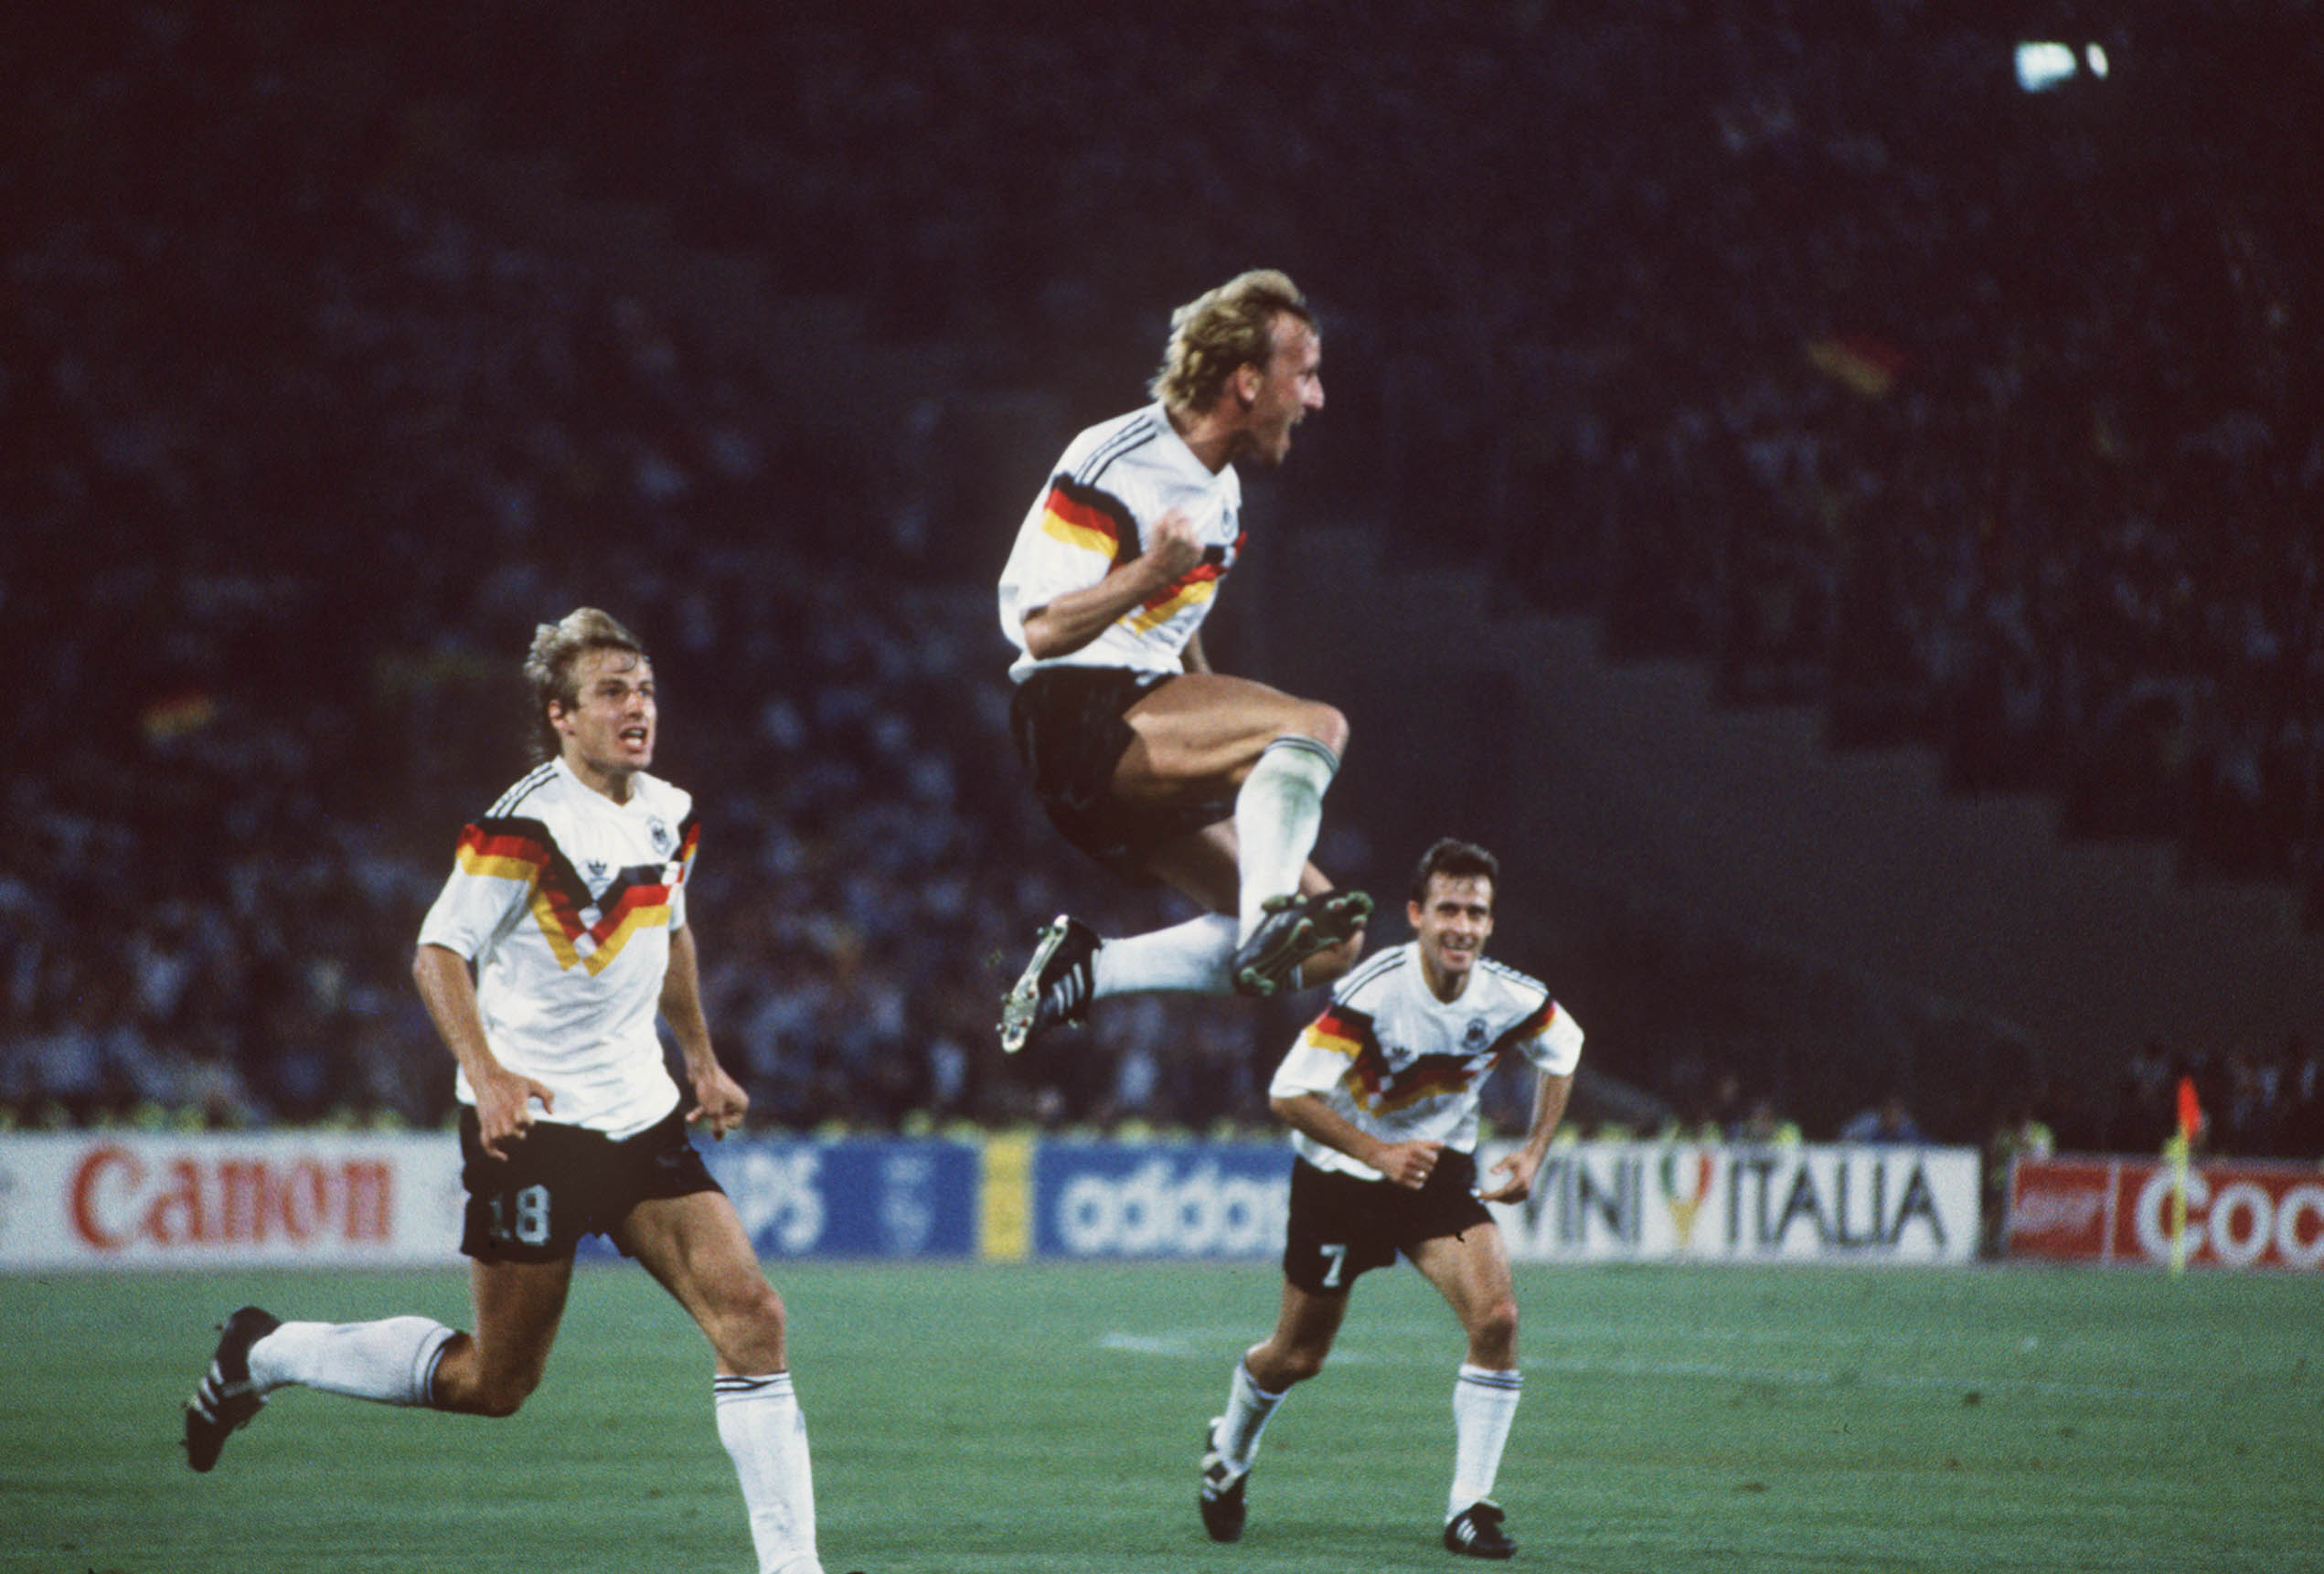 Andreas Brehme celebrates scoring the winning goal in the 1990 World Cup